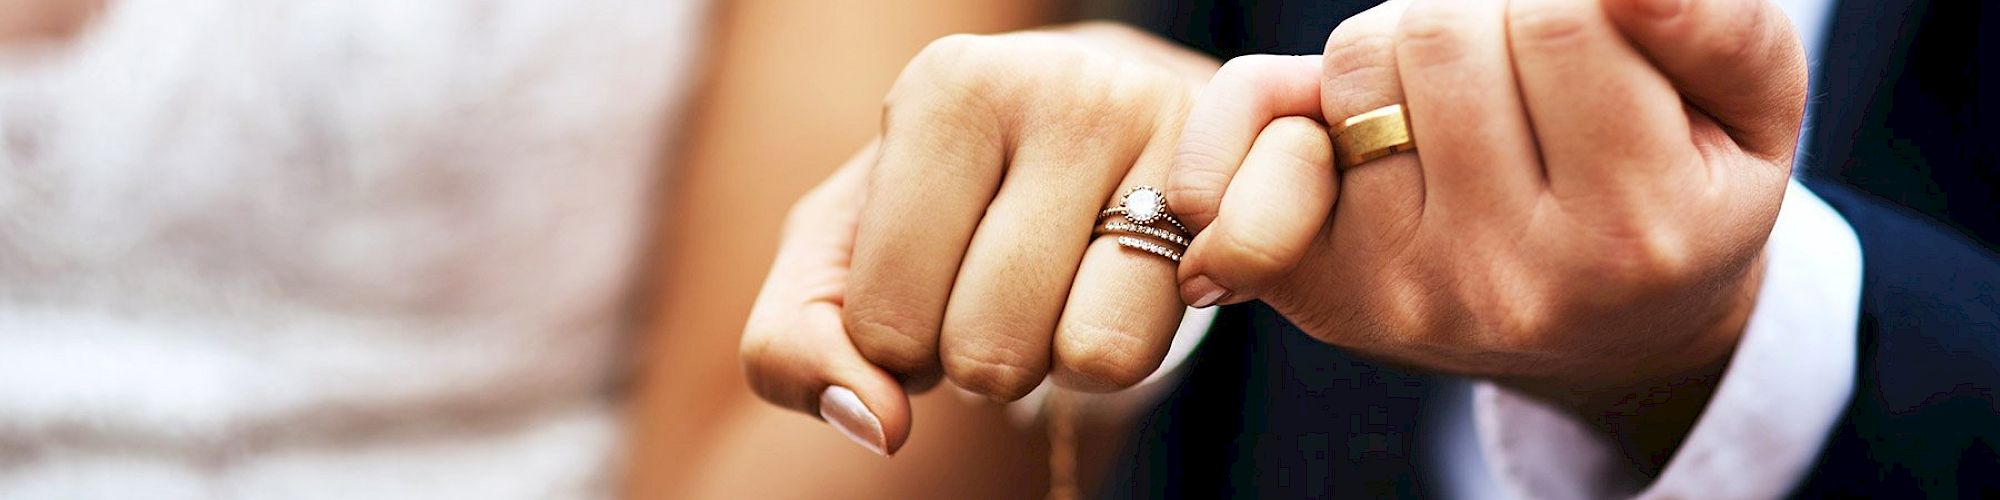 A close-up of two hands with wedding rings, showing a pinky-promise gesture, likely symbolizing a commitment or marriage.